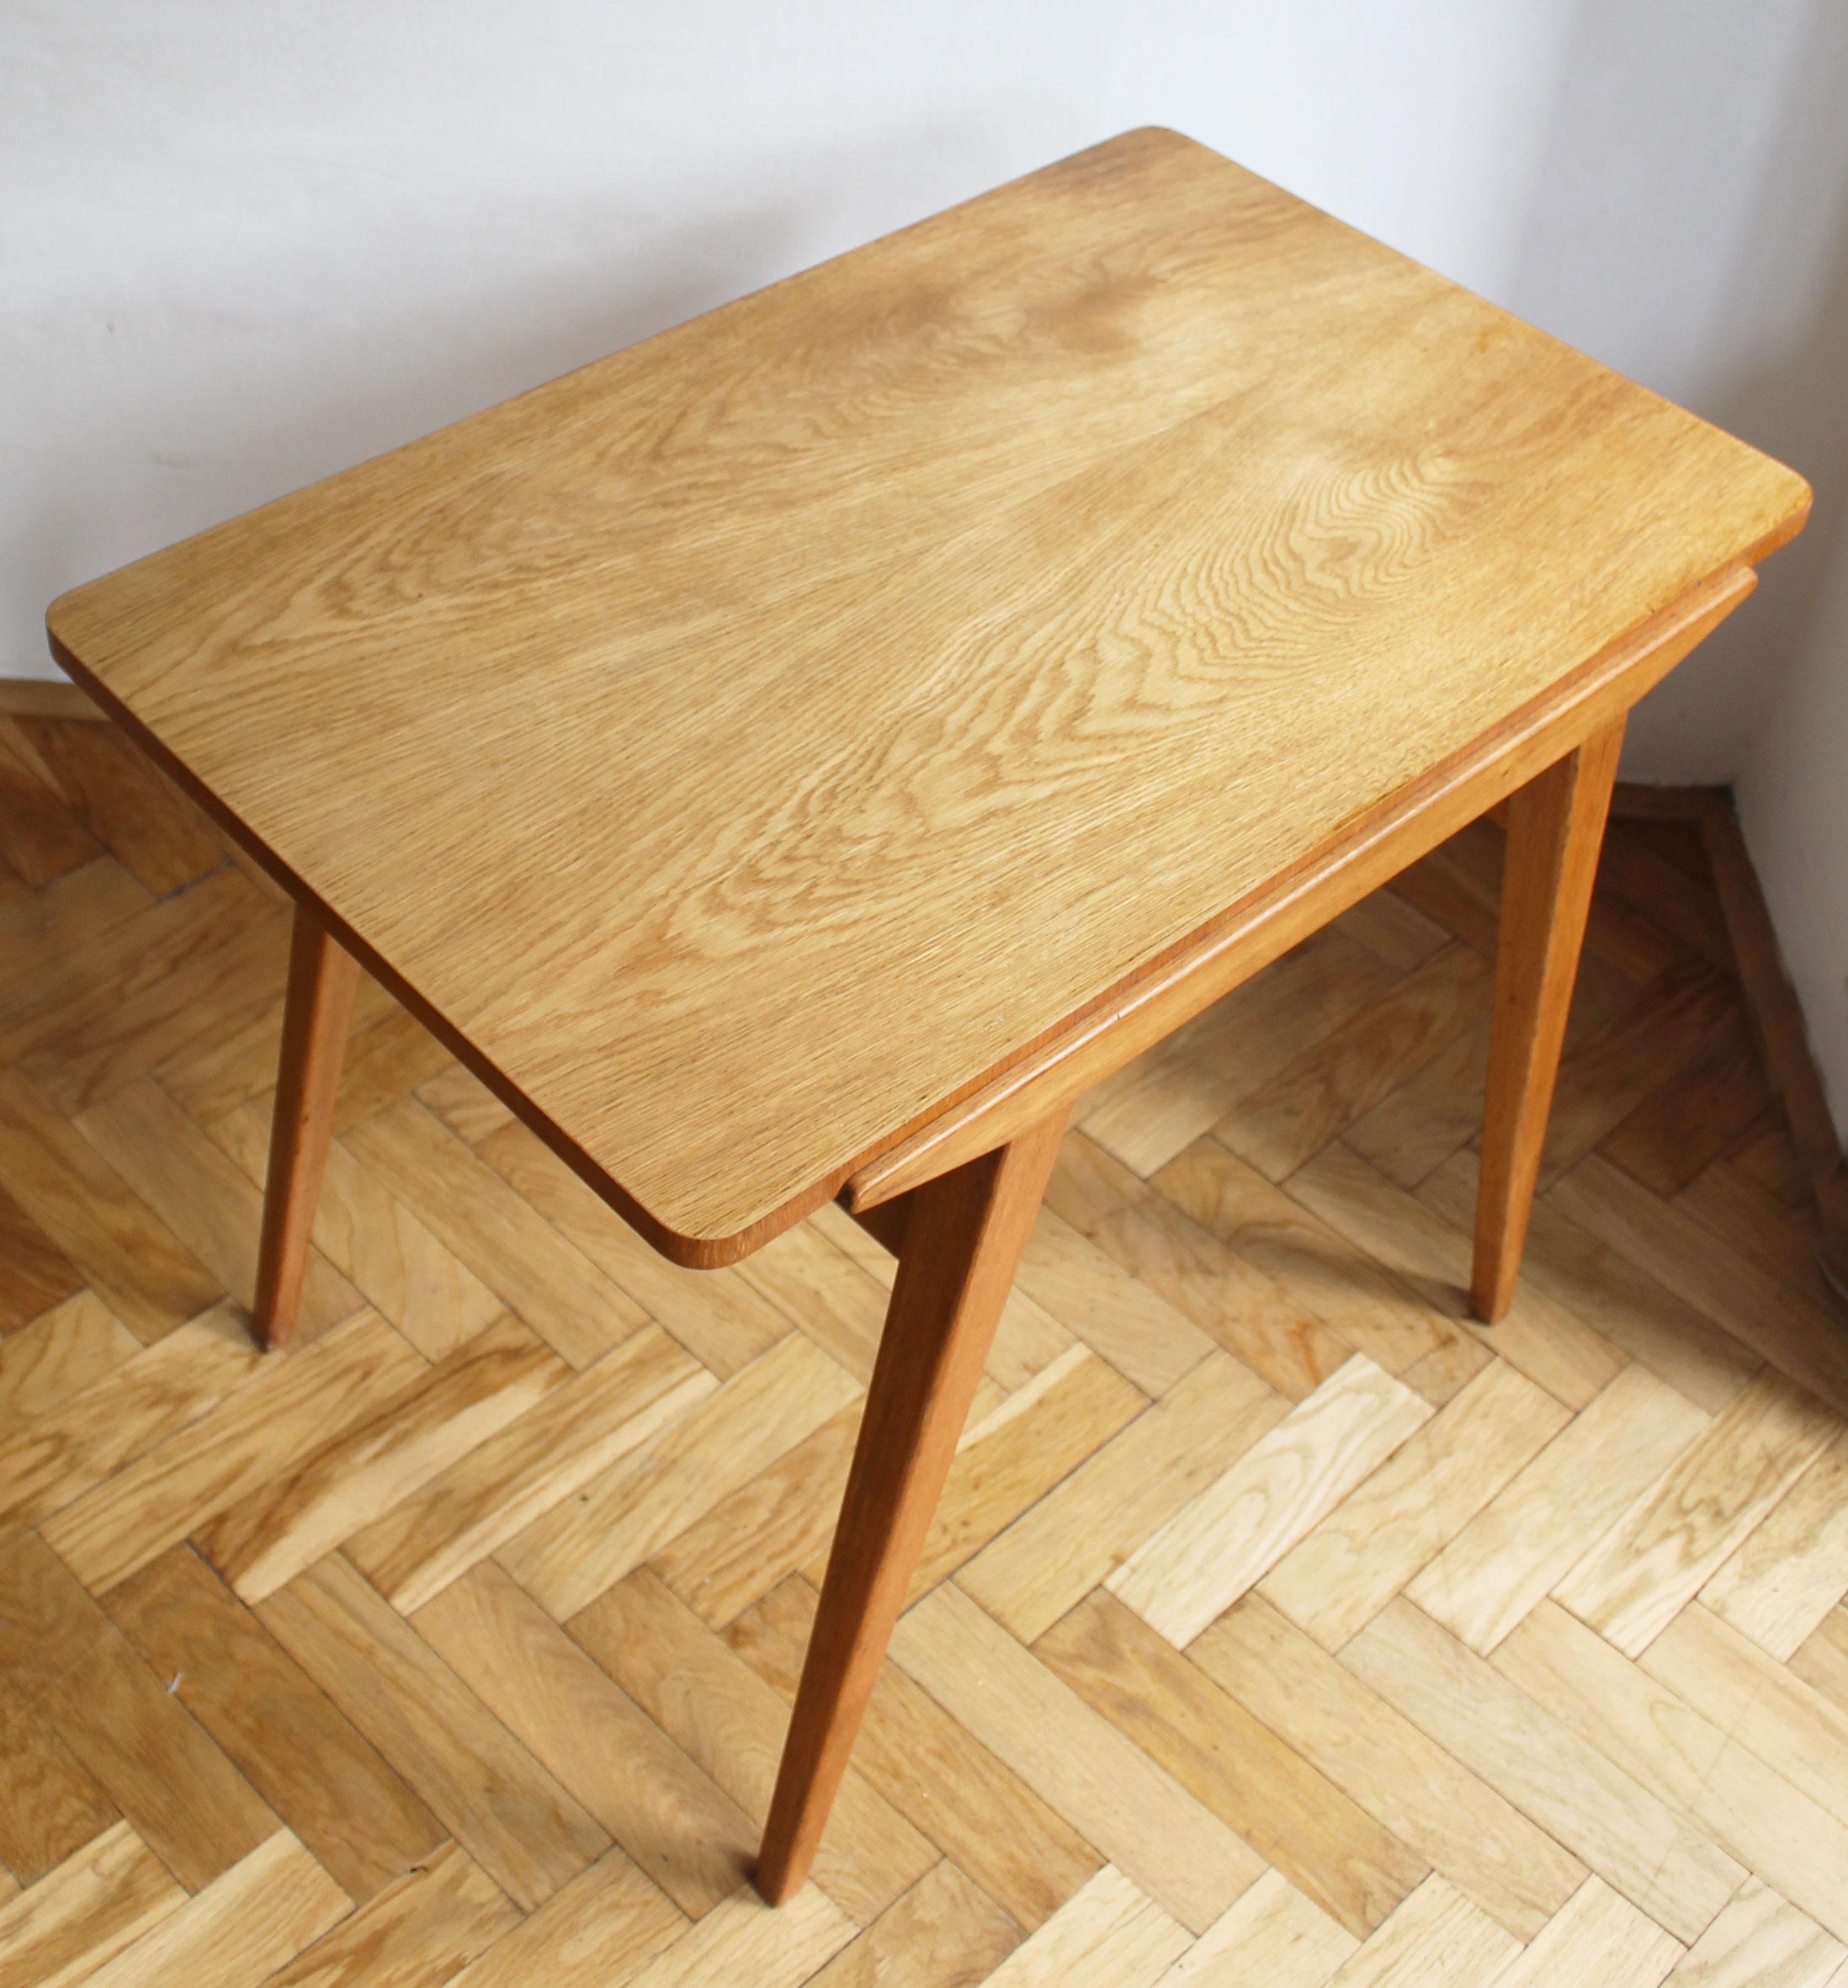 1950's Ash Coffee table In Excellent Condition For Sale In Brno, CZ